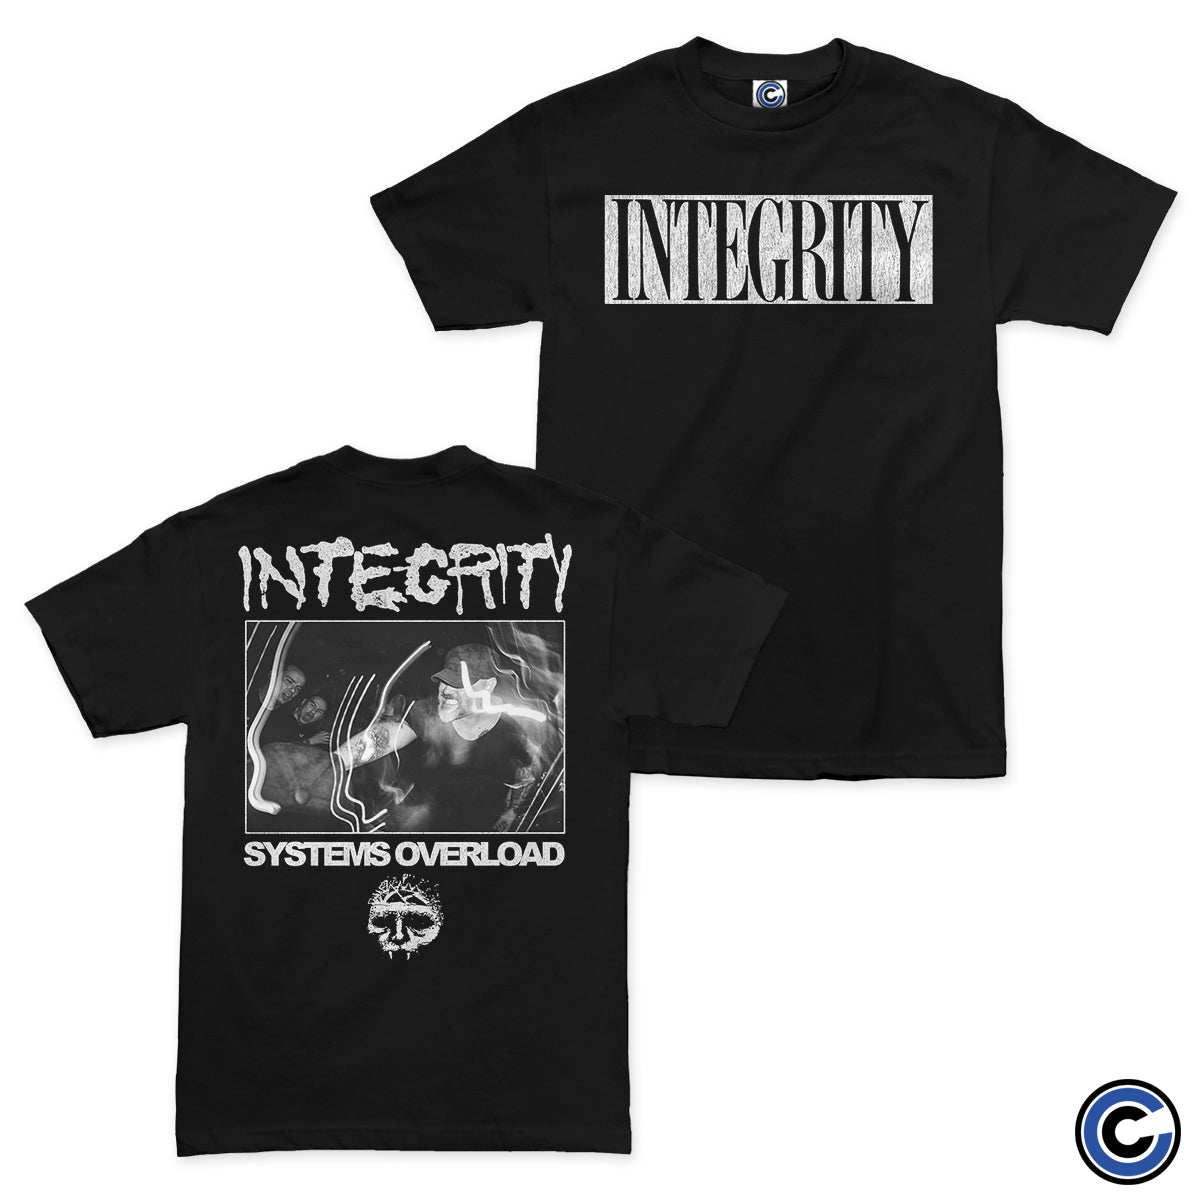 Integrity "System Overload" Shirt